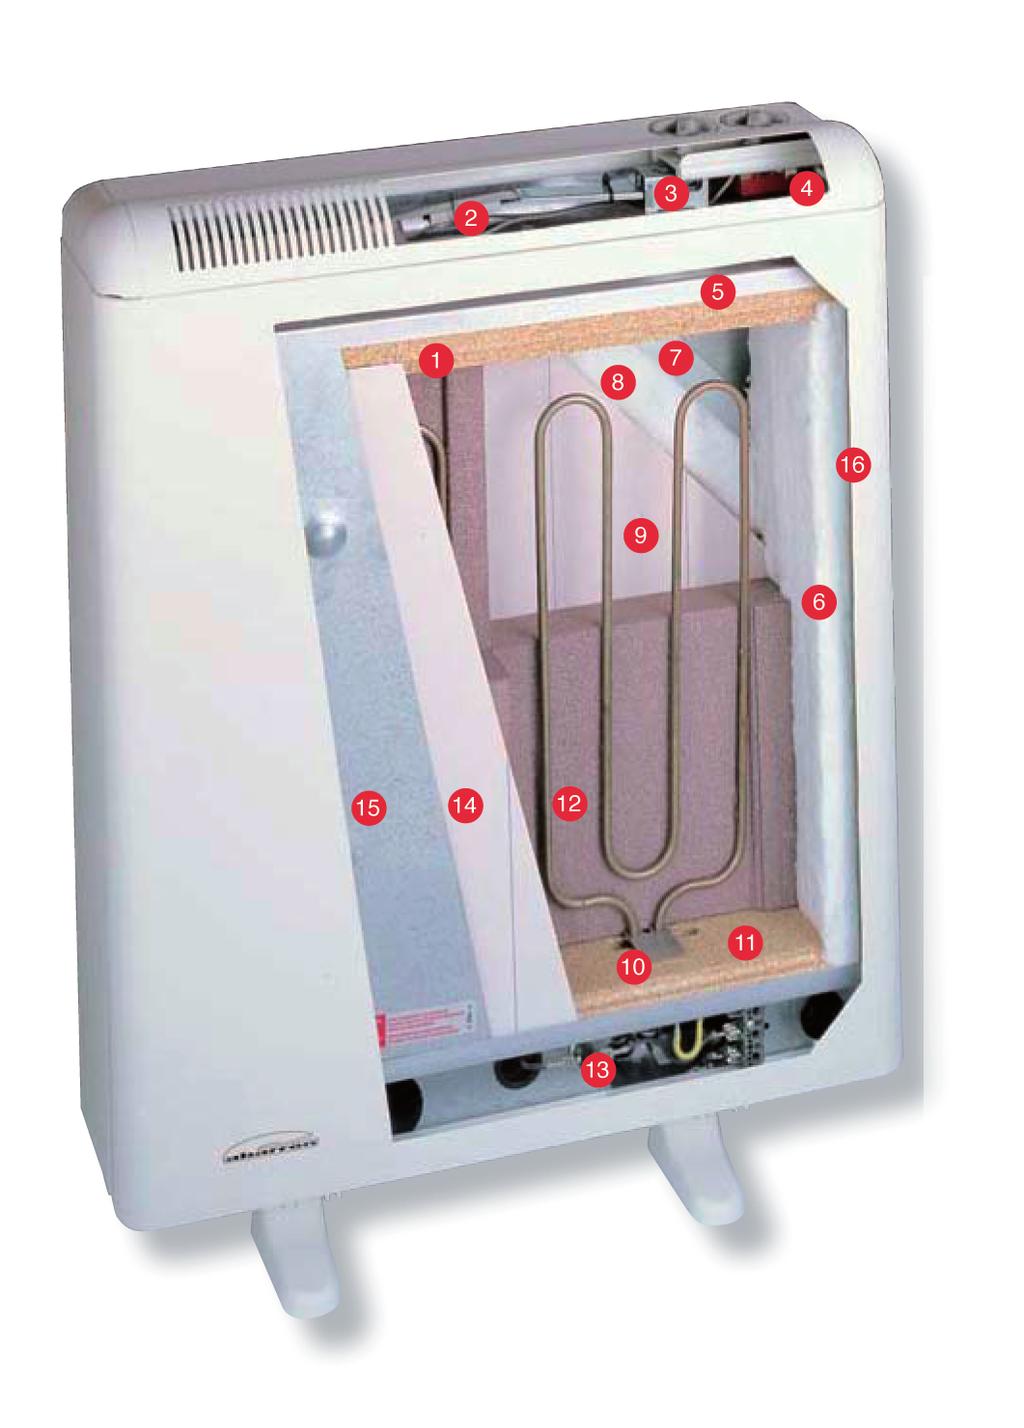 STORAGE HEATERS Storage heaters are the ideal heating The heat stored at night is gradually There are two types of storage heaters solution for many homes.